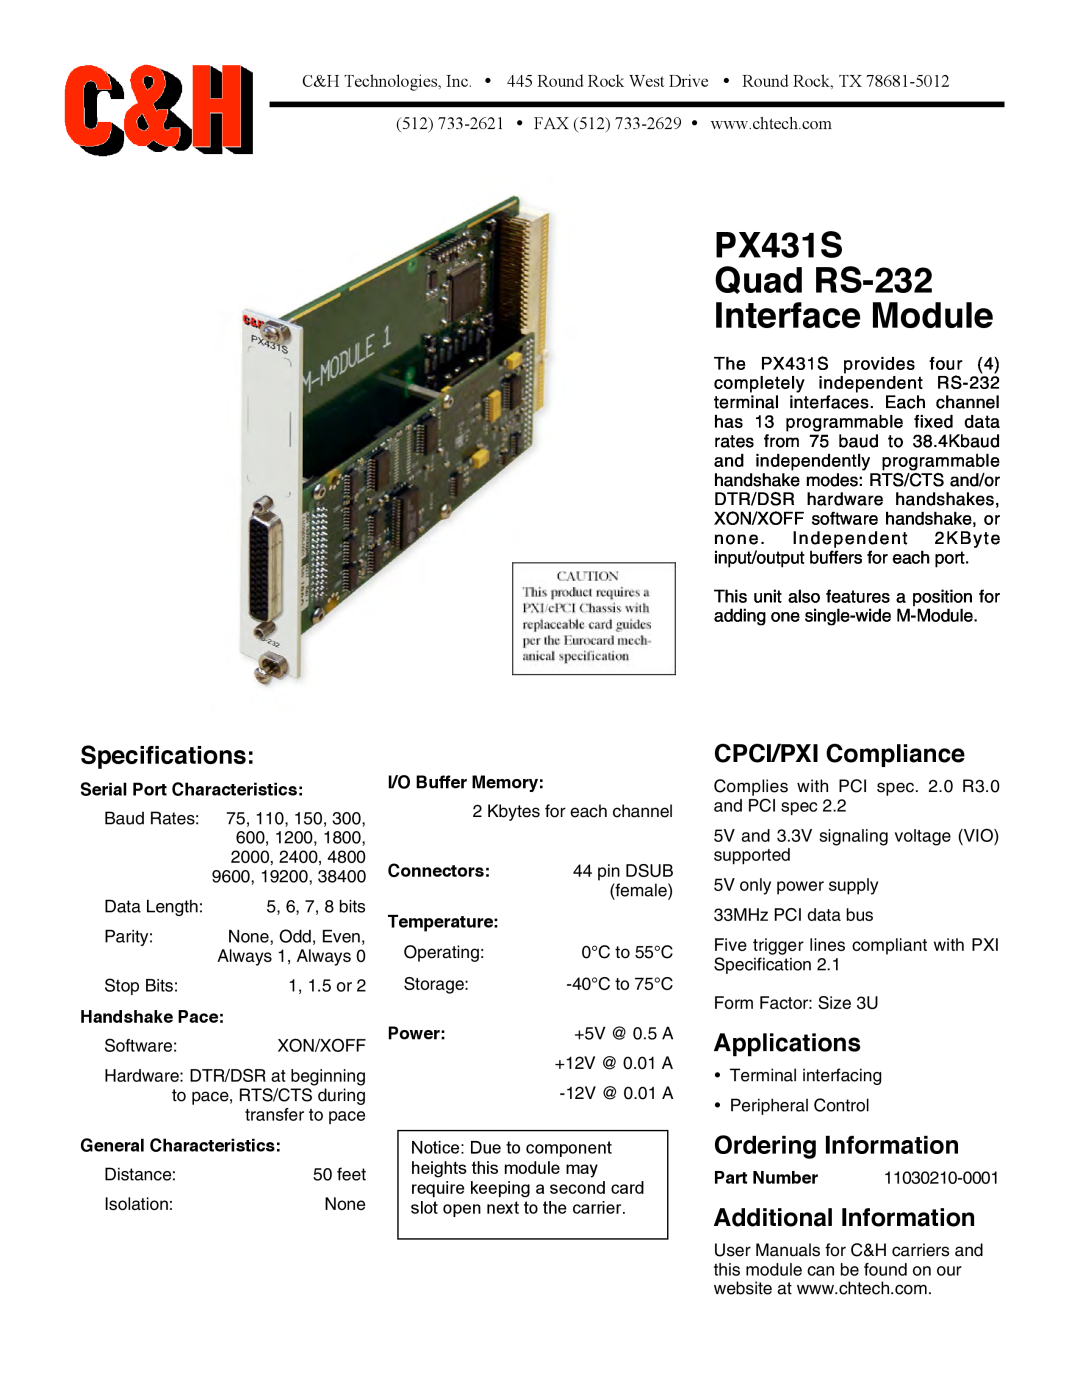 CH Tech specifications PX431S Quad RS-232 Interface Module, Specifications, CPCI/PXI Compliance, Applications, Power 